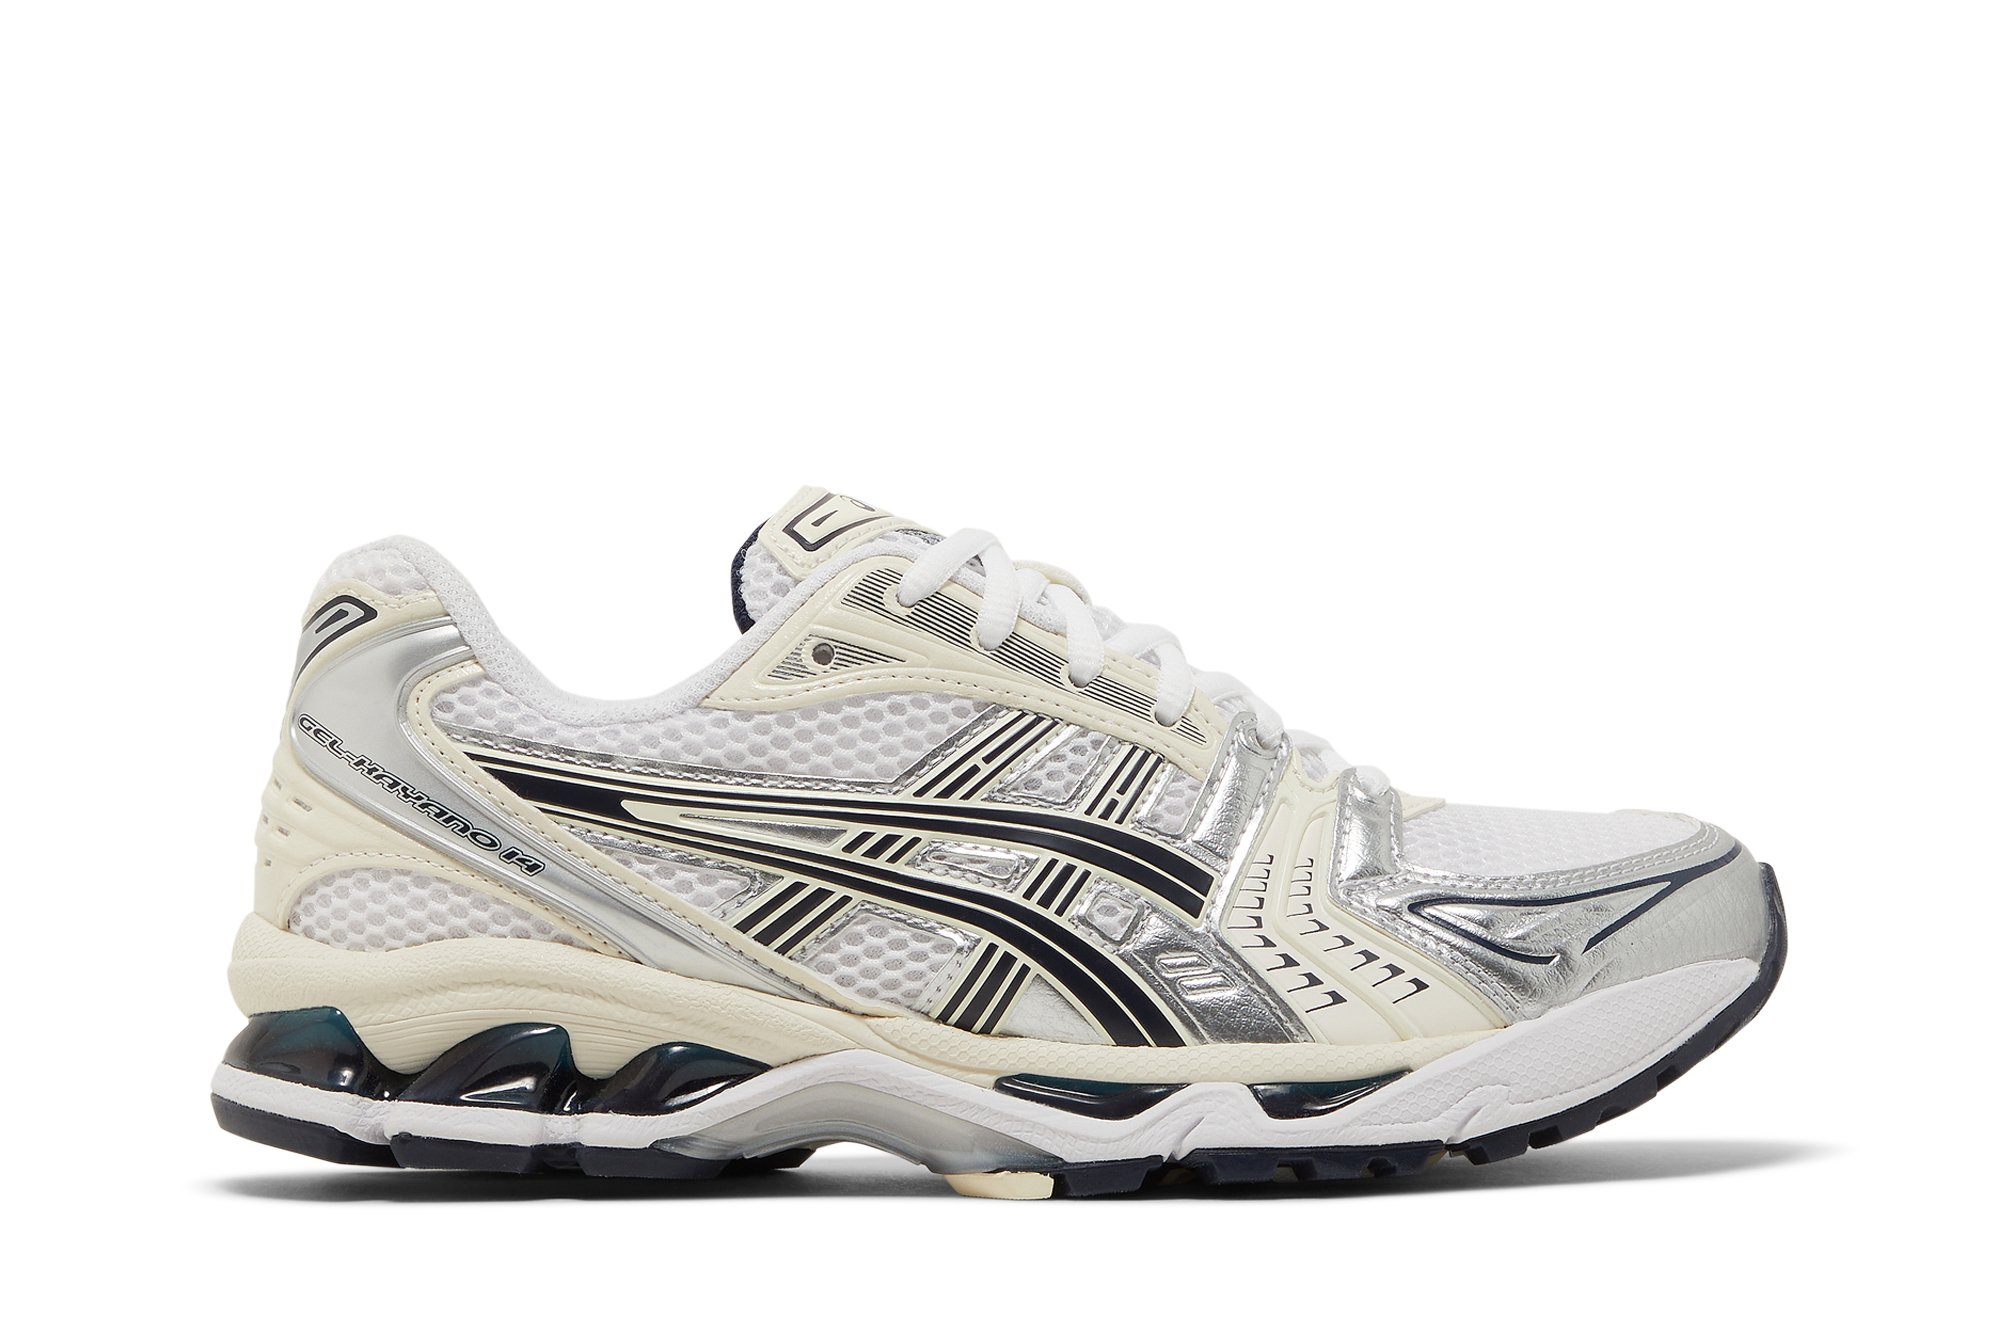 Buy Wmns Gel Kayano 14 'White Midnight' - 1202A056 109 | GOAT